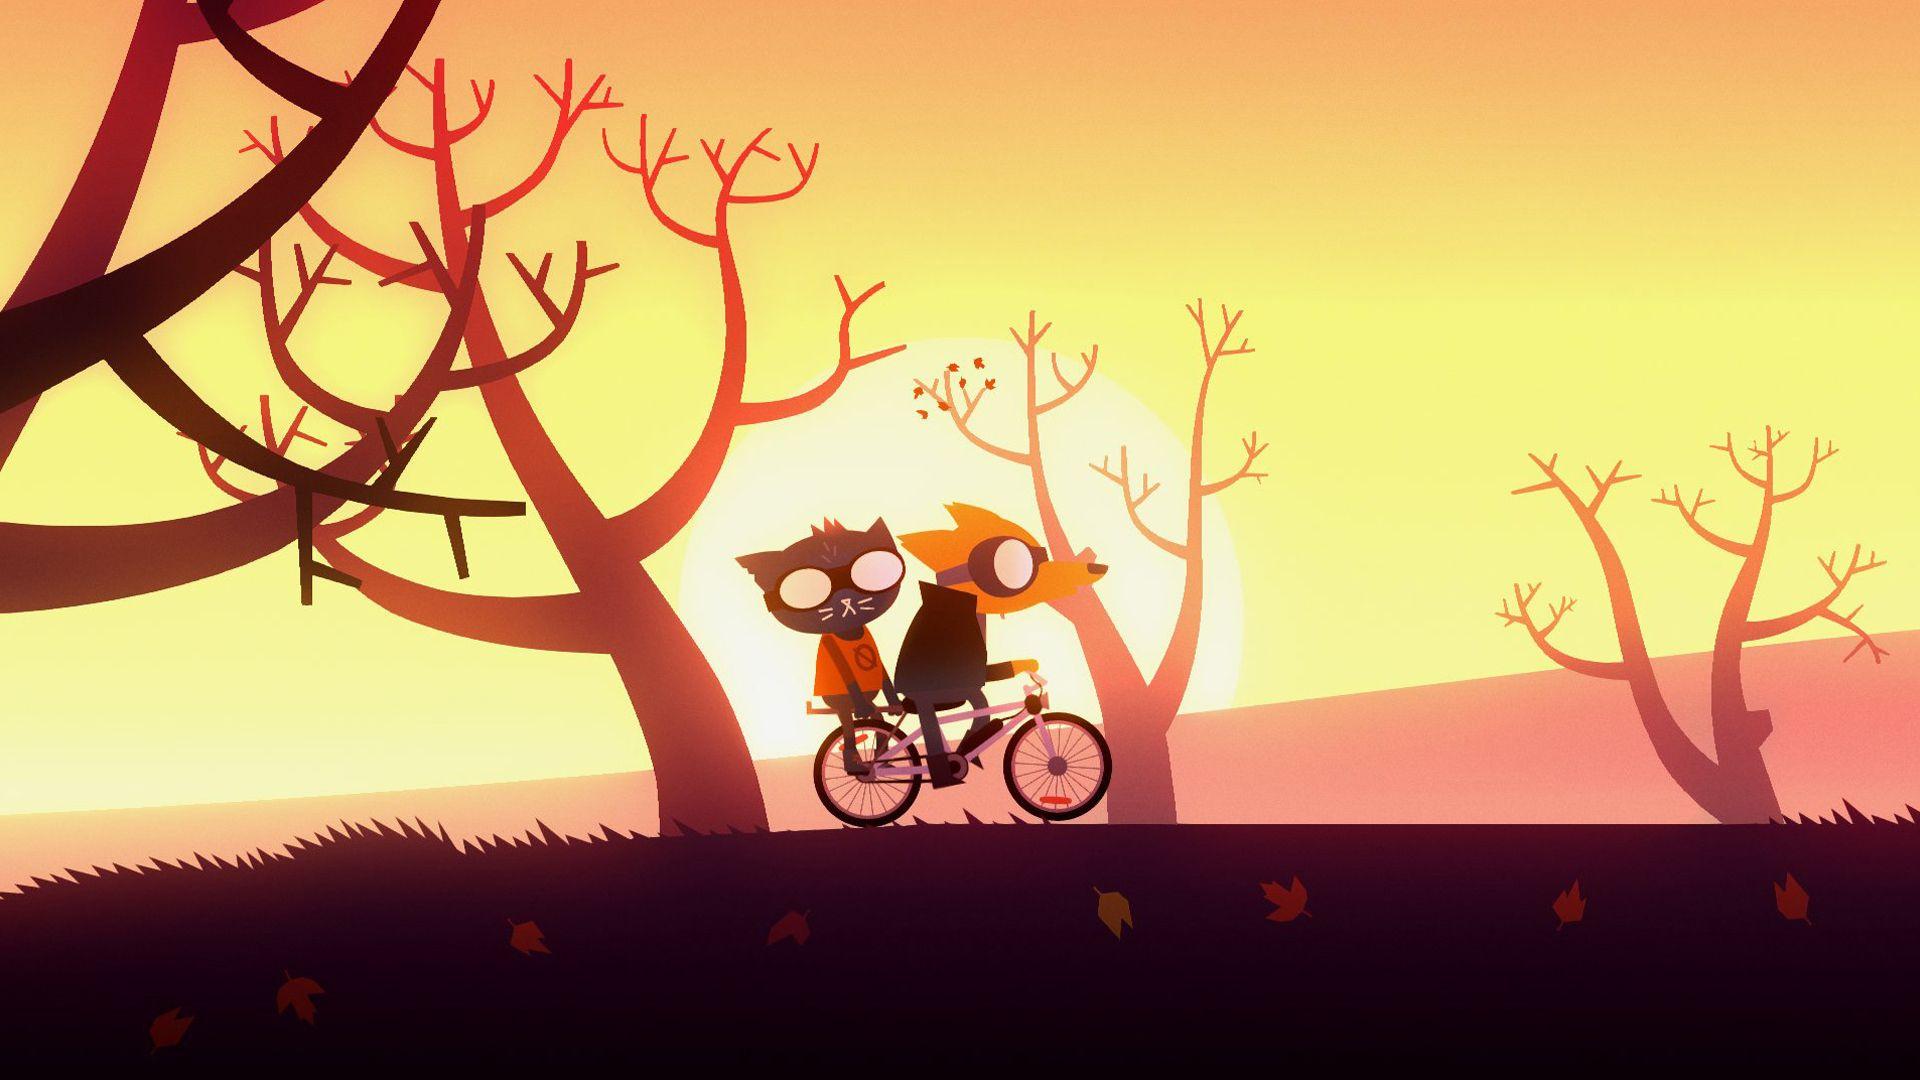 Night In The Woods wallpapers for desktop download free Night In The Woods  pictures and backgrounds for PC  moborg